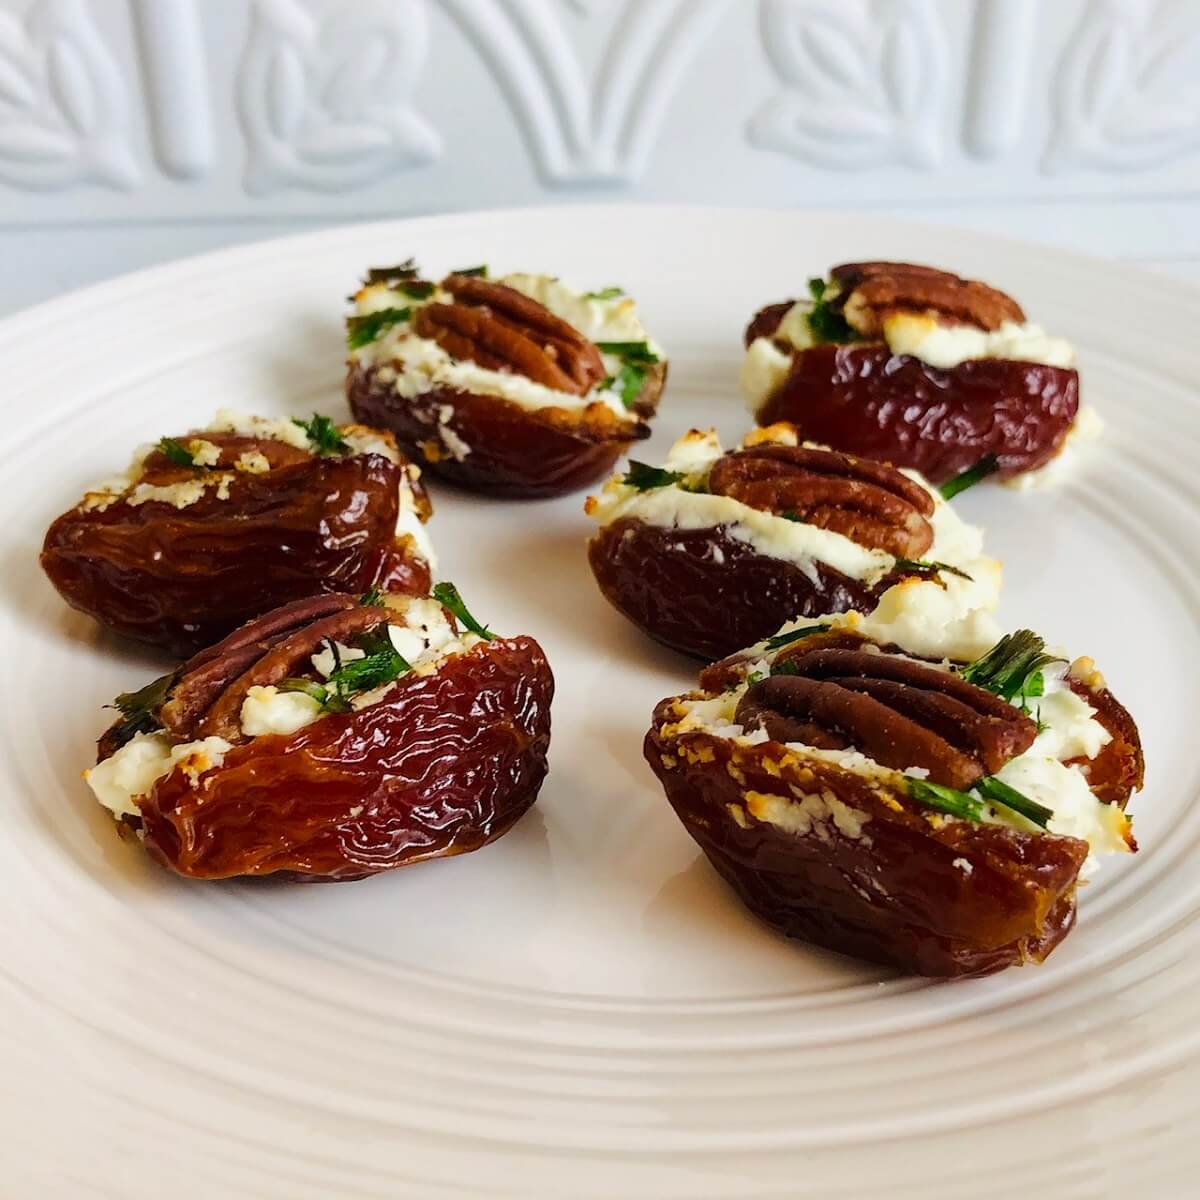 Some goat cheese and pecan stuffed dates arranged on a white platter against a white backsplash.